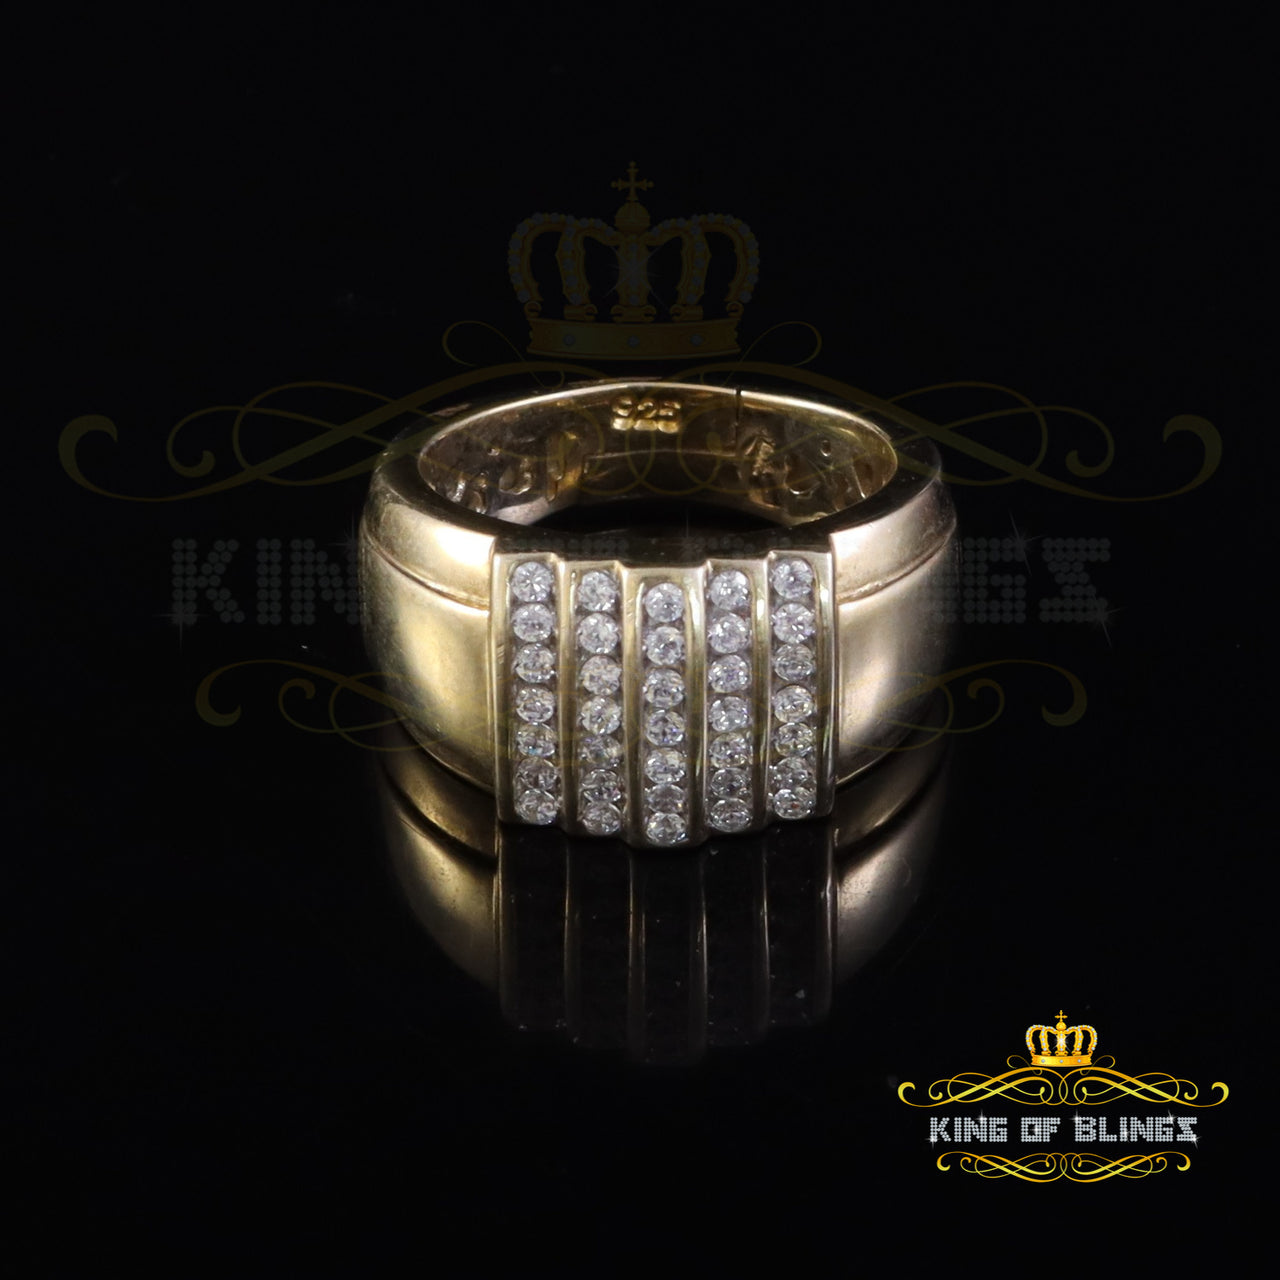 King Of Bling's Yellow Silver Jewelry Rhodium Plated CZ 1.40ct Wide Band Square Men Ring SZ 8 KING OF BLINGS